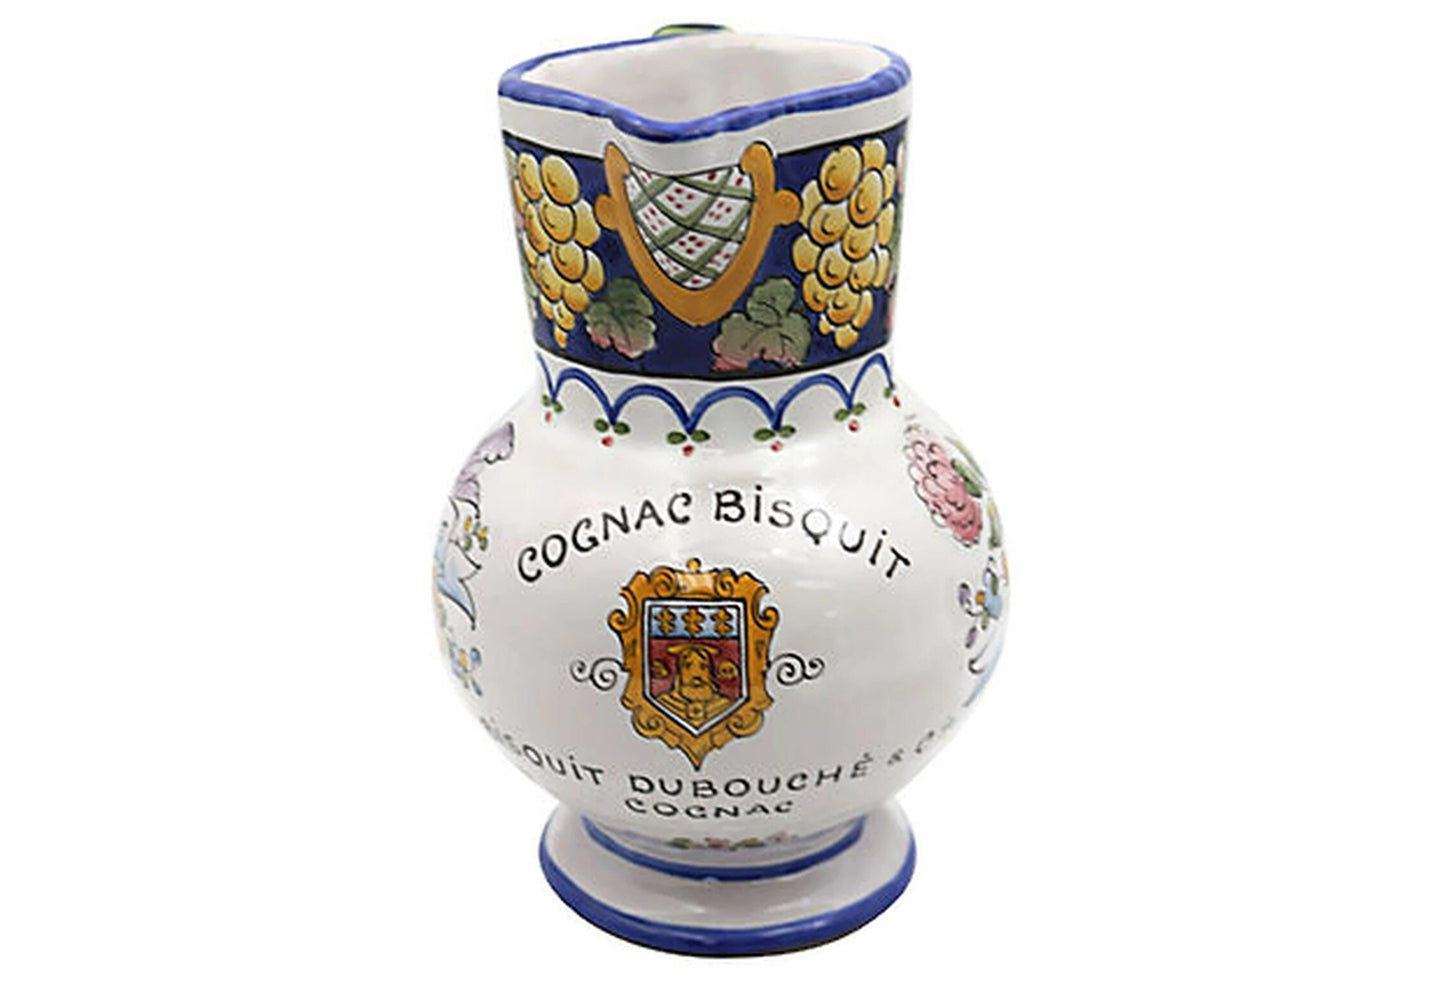 French Faience Cognac Biscuit Advertising Jug